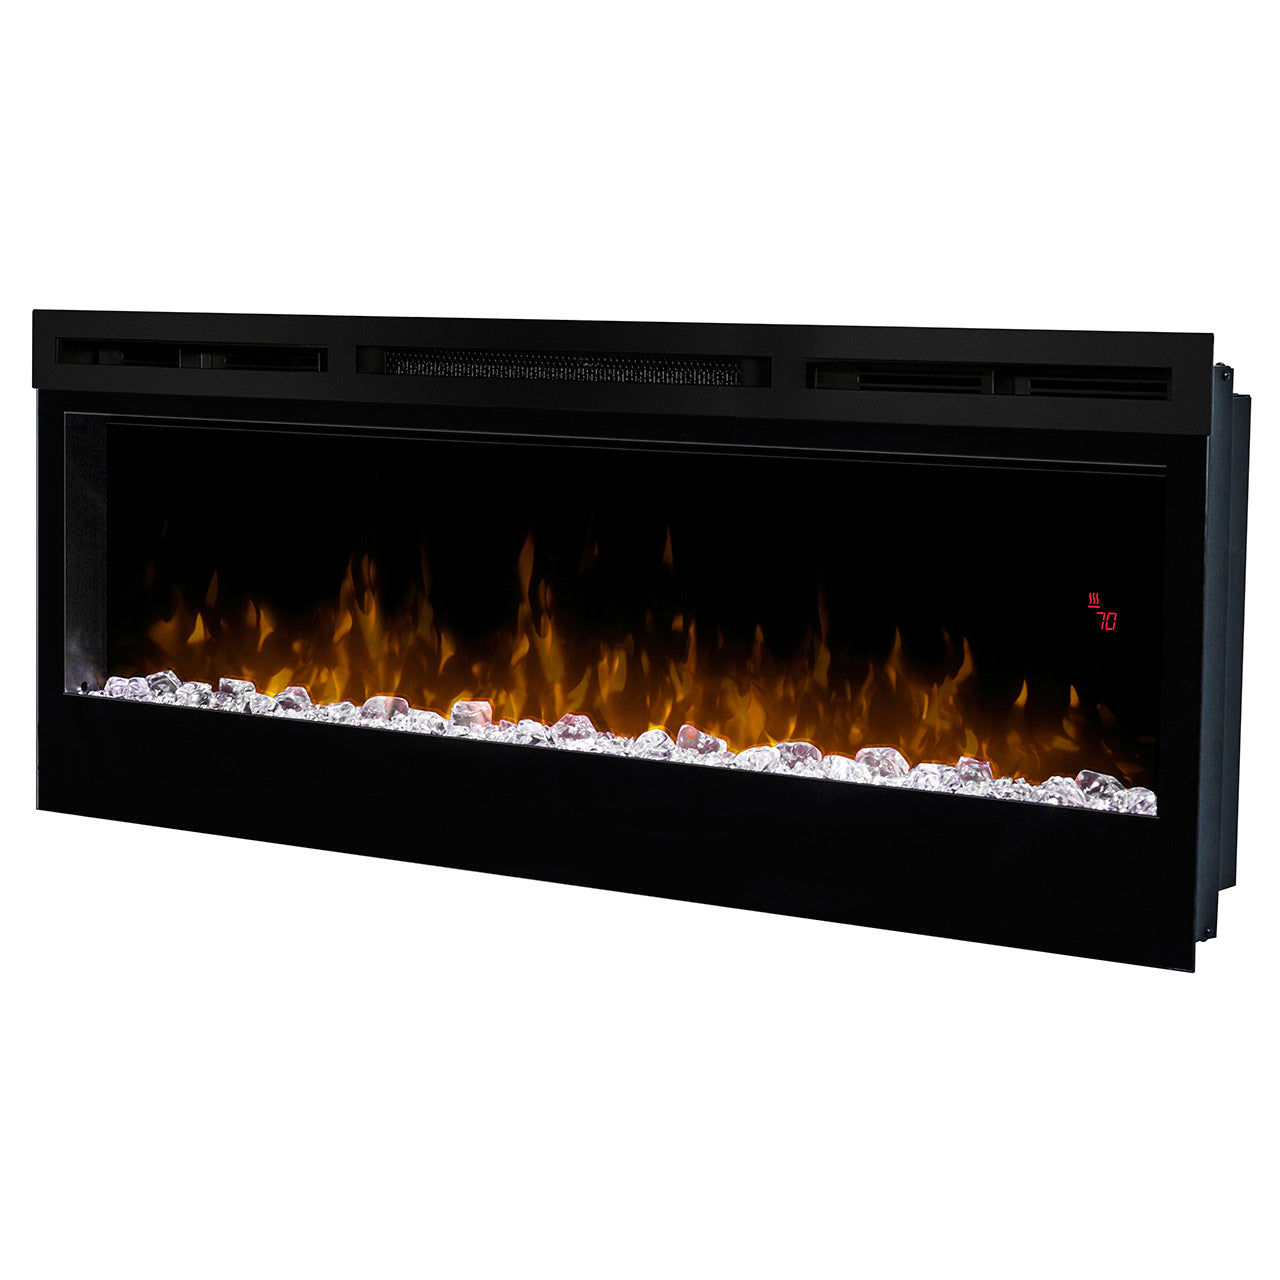 Dimplex Prism Series 50" Linear Electric Fireplace